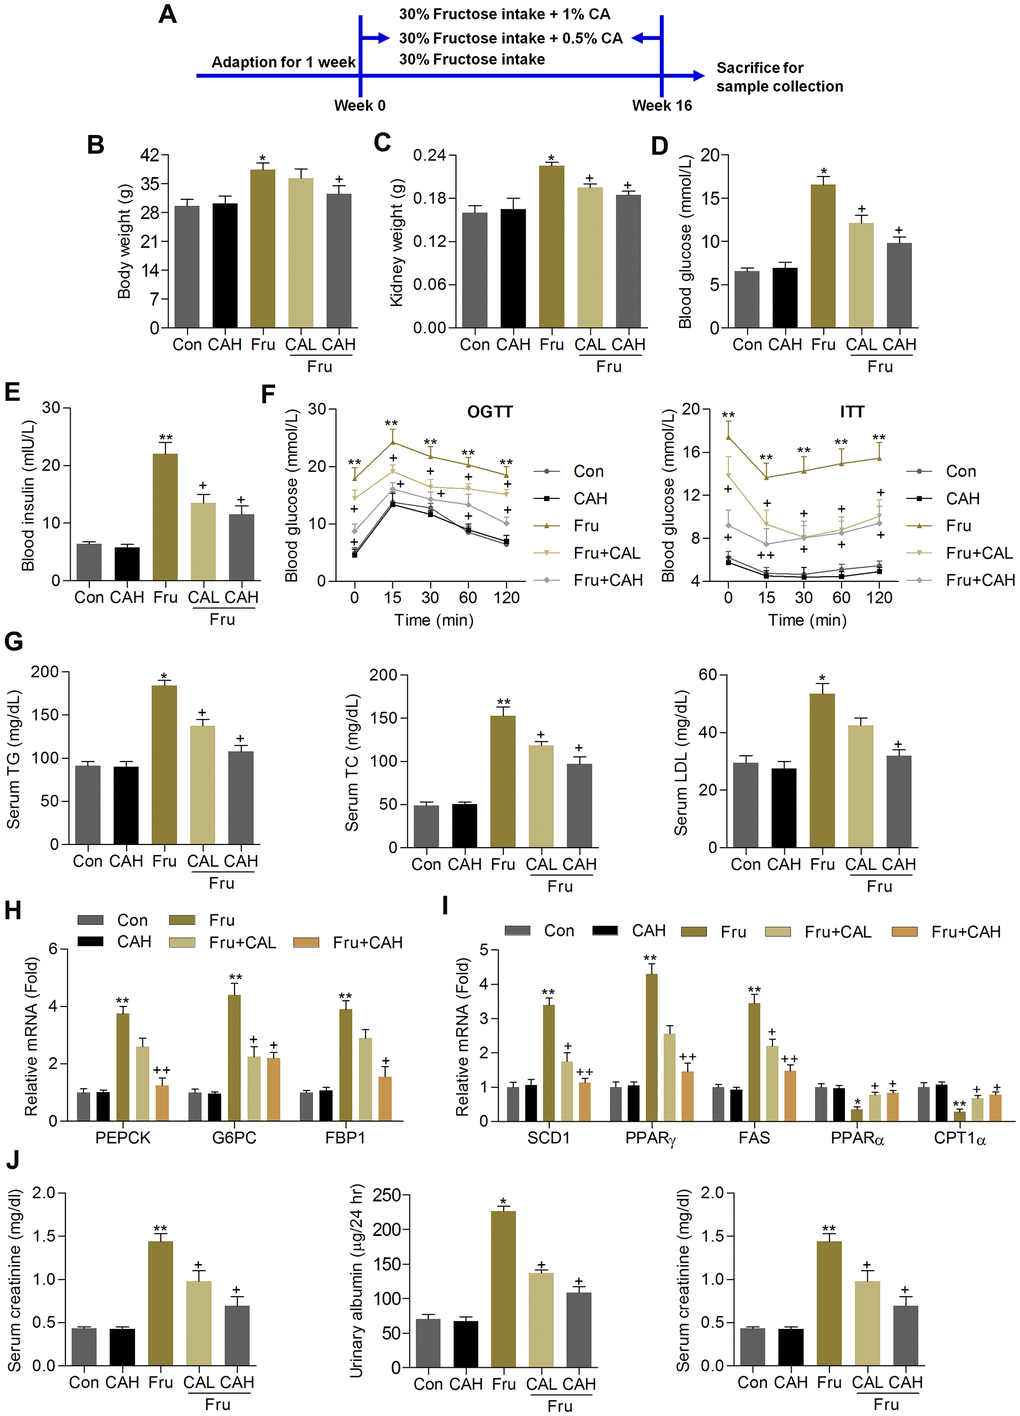 Carminic acid ameliorates renal dysfunction in Fru-fed mice. (A) Animal experimental procedure was shown. (B) Body weight of mice. (C) Kidney weight of mice was measured. n = 8 in each group. (D) Blood glucose levels were assessed. (E) Serum insulin levels were measured. (F) OGTT and ITT analysis were performed. n = 8 in each group. (G) Serum TG, TC and LDL contents were determined. n = 8 in each group. (H) RT-qPCR analysis for gene expression of PEPCK, G6PC and FPB1 in kidney samples of mice. n = 4 in each group. (I) RT-qPCR results for genes regulating fatty acid synthesis (SCD1, PPARγ and FAS) and β-oxidation (PPARα and CPT1α) in renal tissues. n = 4 in each group. (J) Serum creatinine contents, urinary albumin and BUN levels were determined. n = 8 in each group. The results are expressed as the means ± SEM. *P**P+P